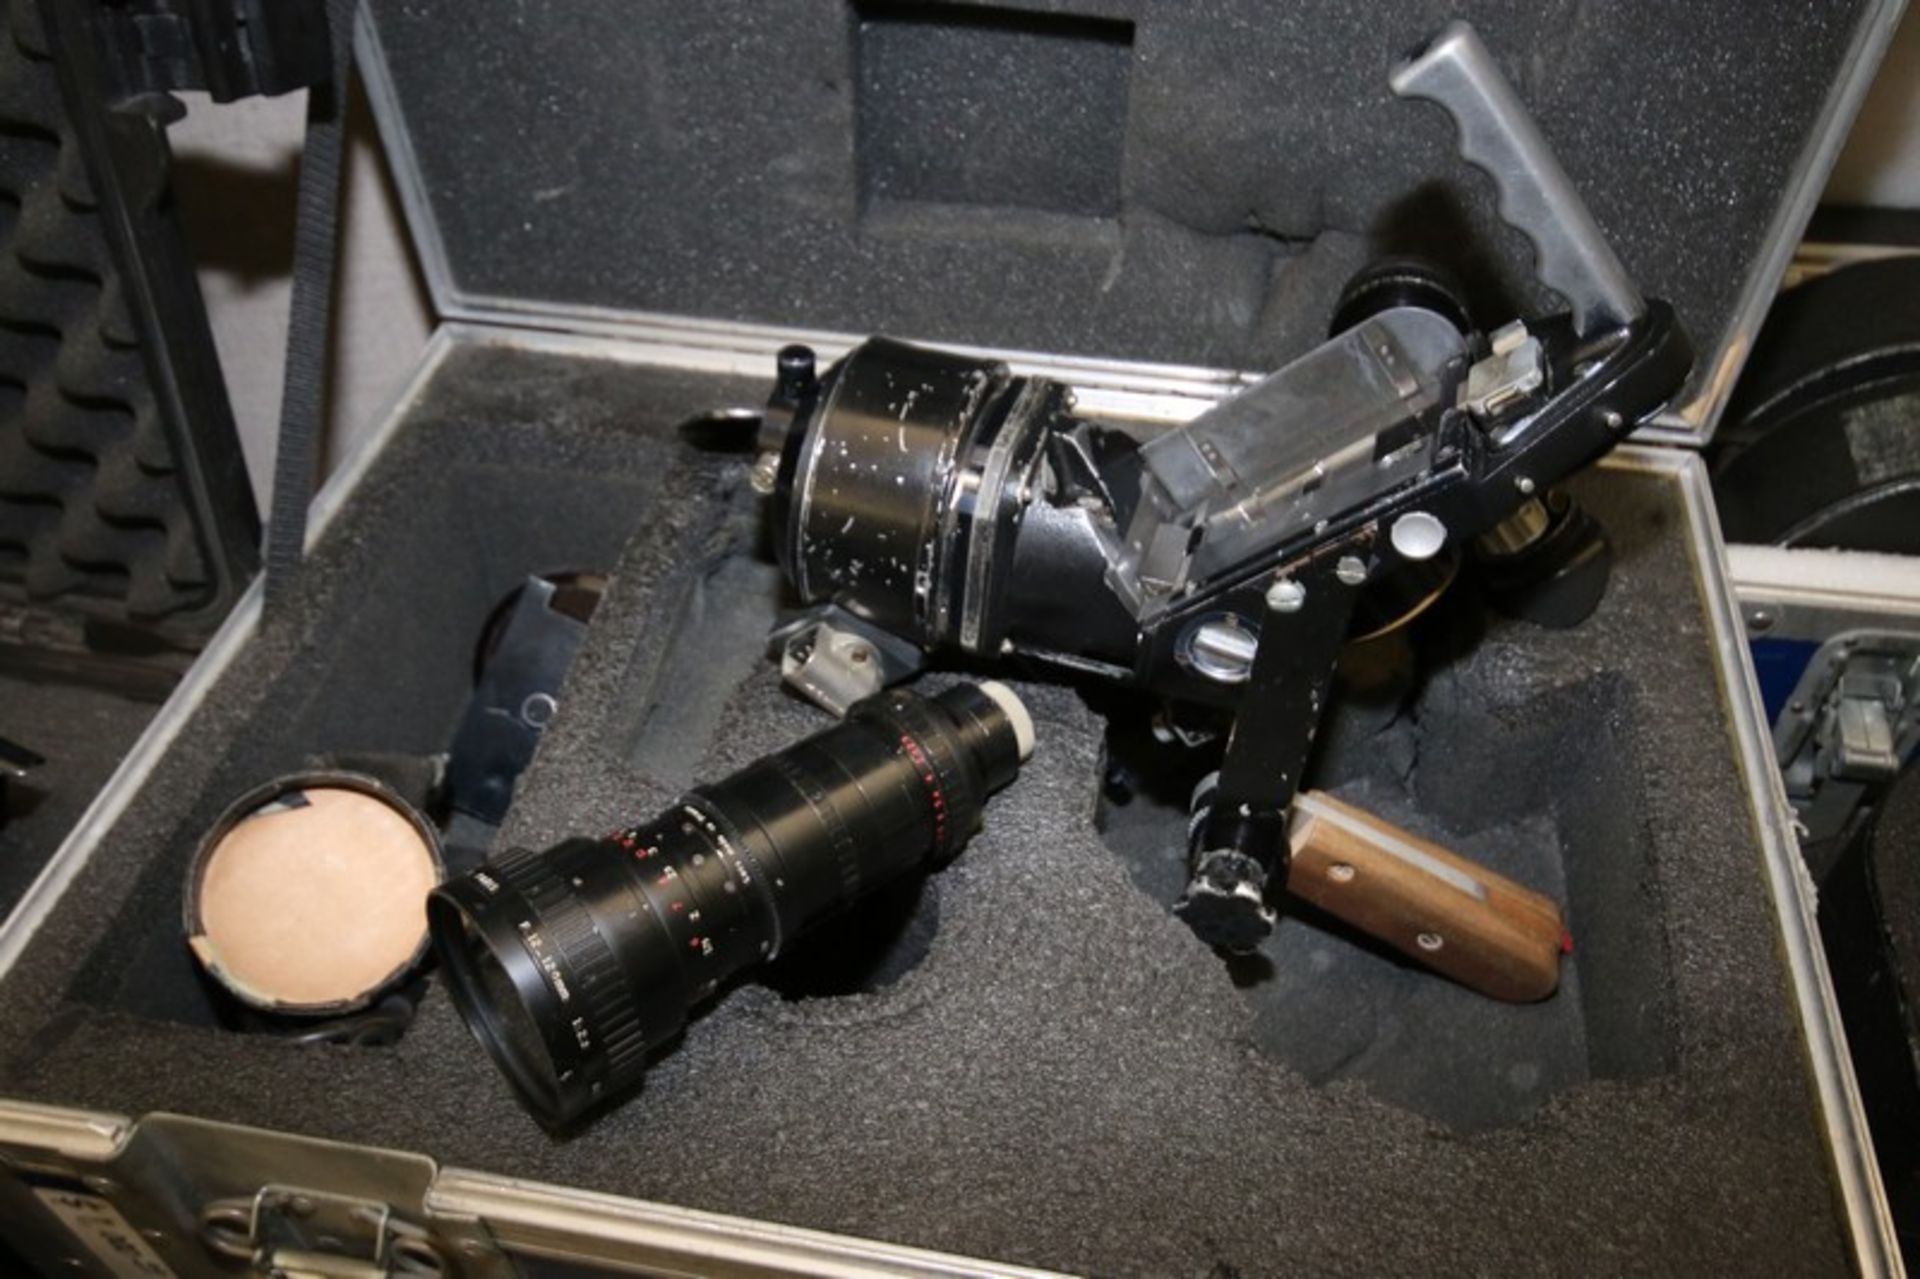 Angenieux Camera Eclair 16- w/12-120 Angenieux Zoom Lens 10x12, magazines, sound synced 16mm film - Image 2 of 2